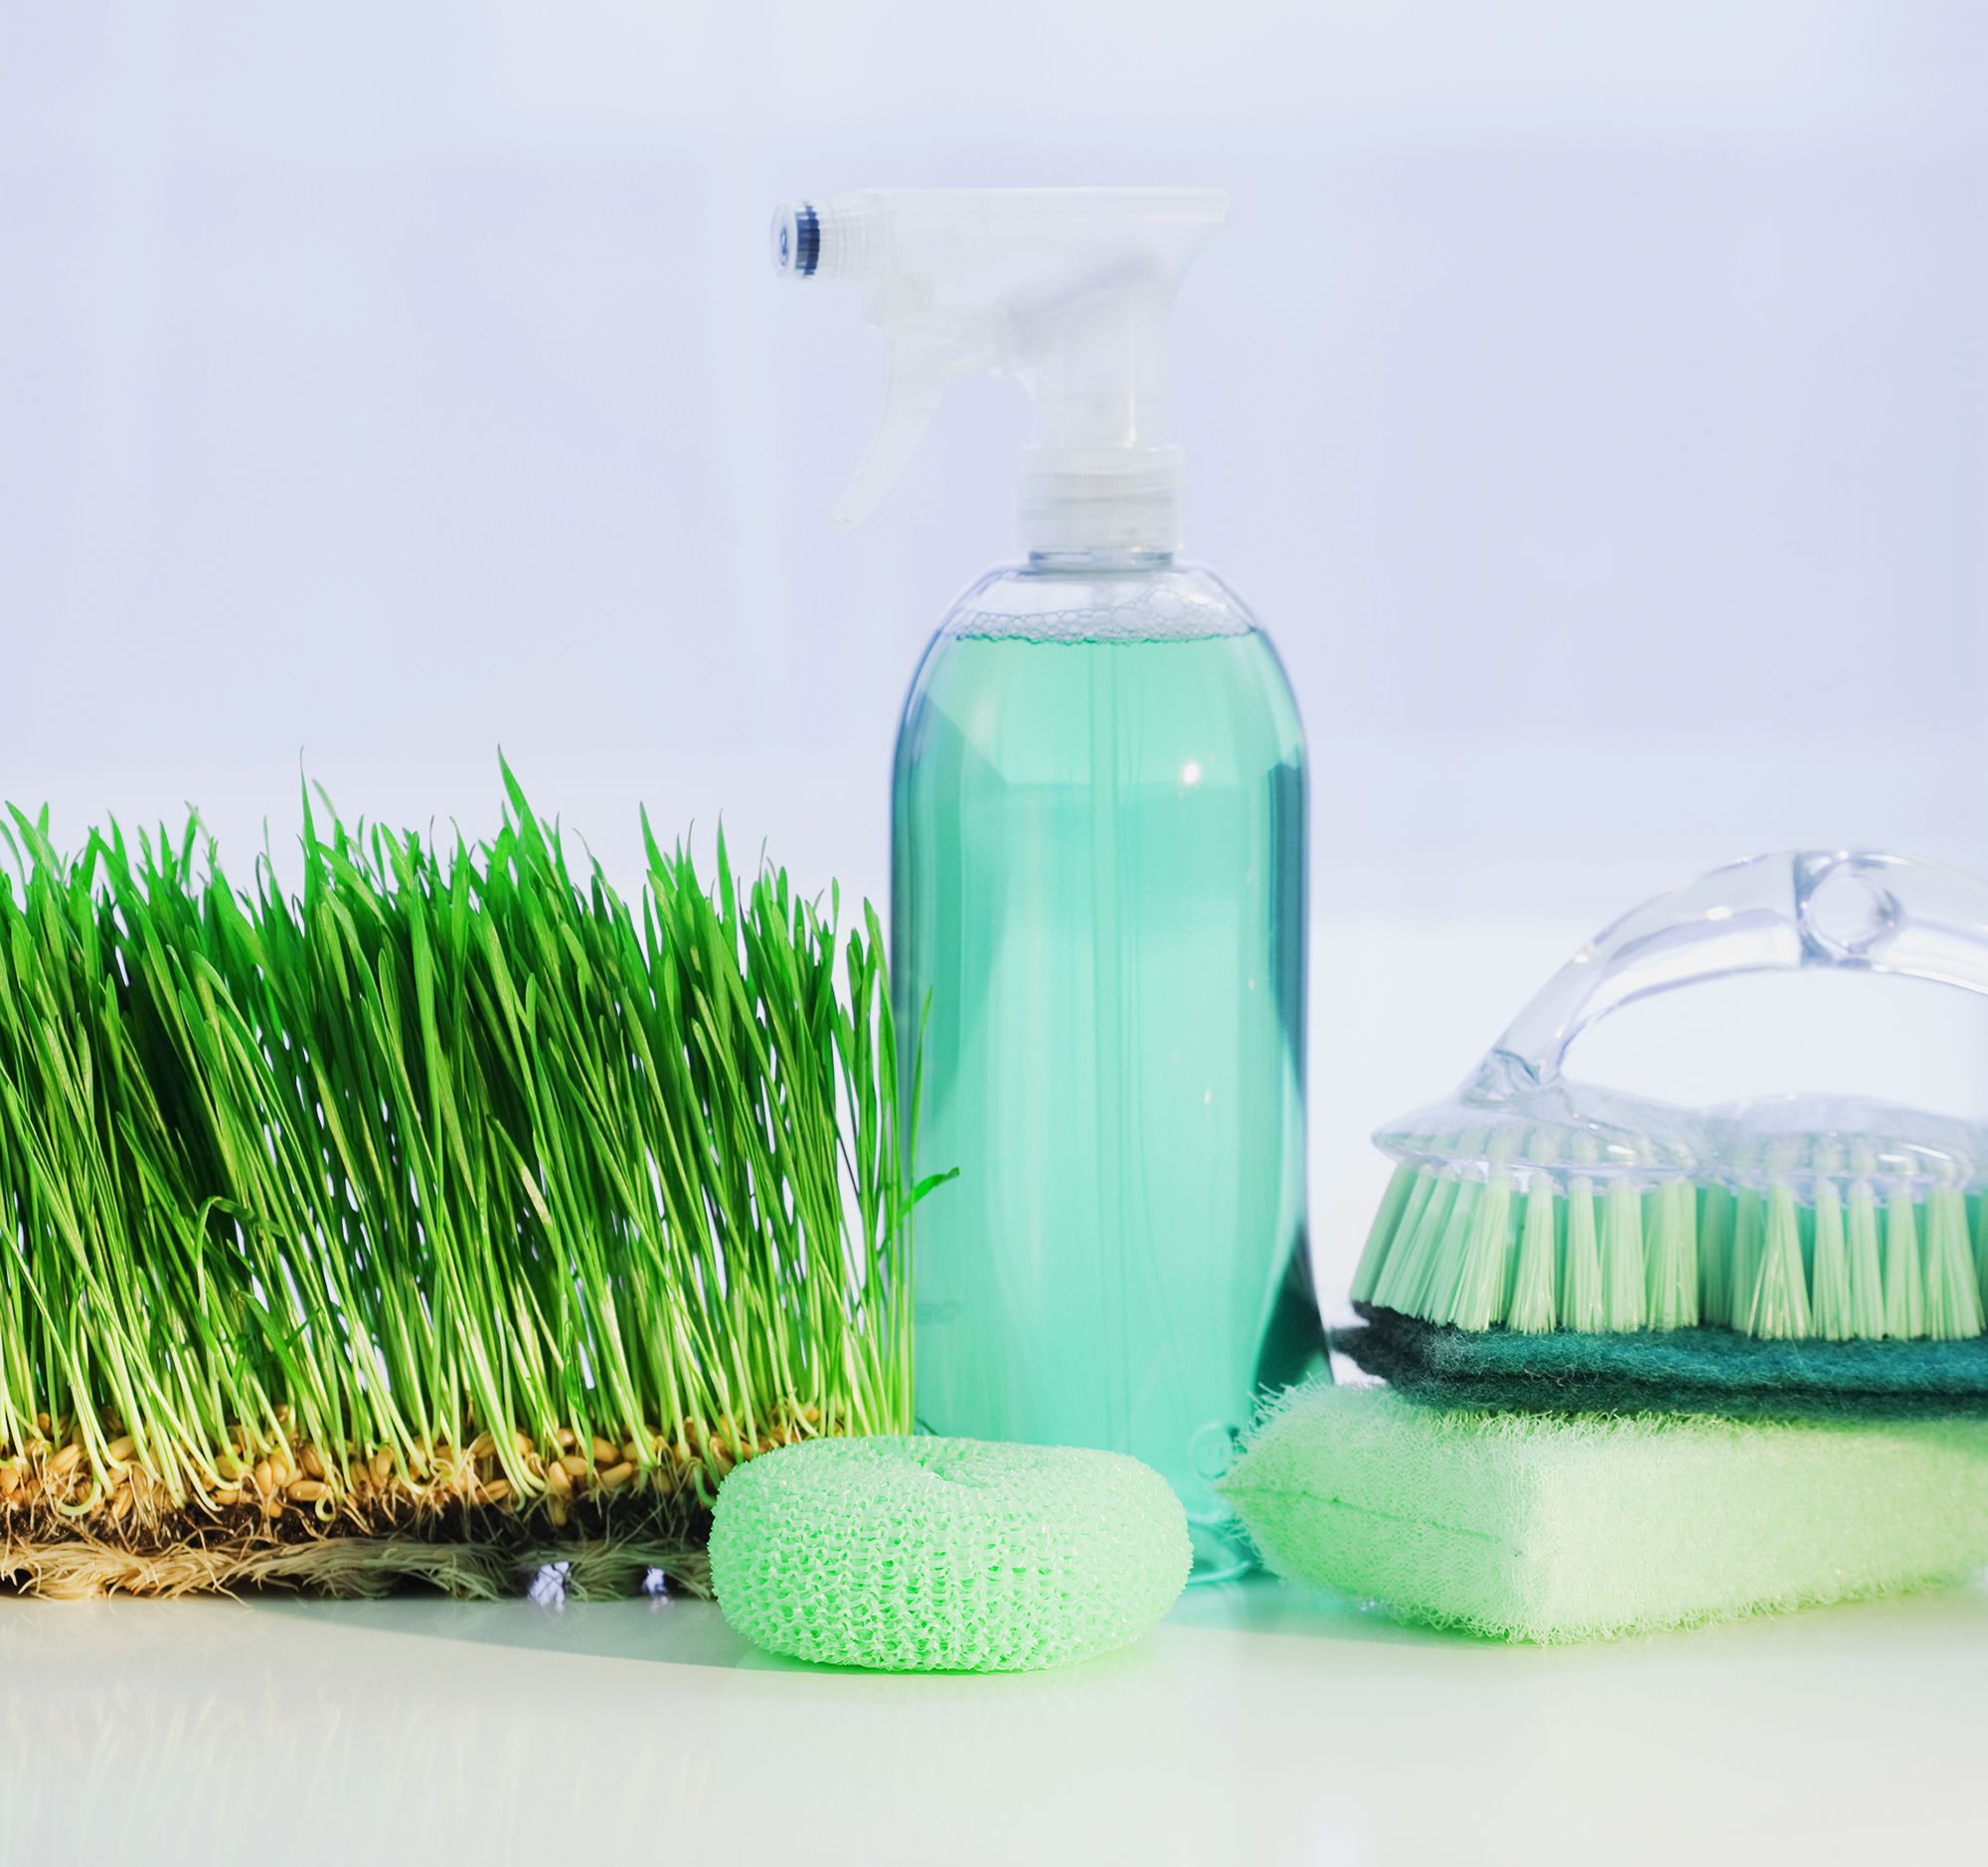 Are Natural Disinfectants Effective? How to Know If a Cleaner